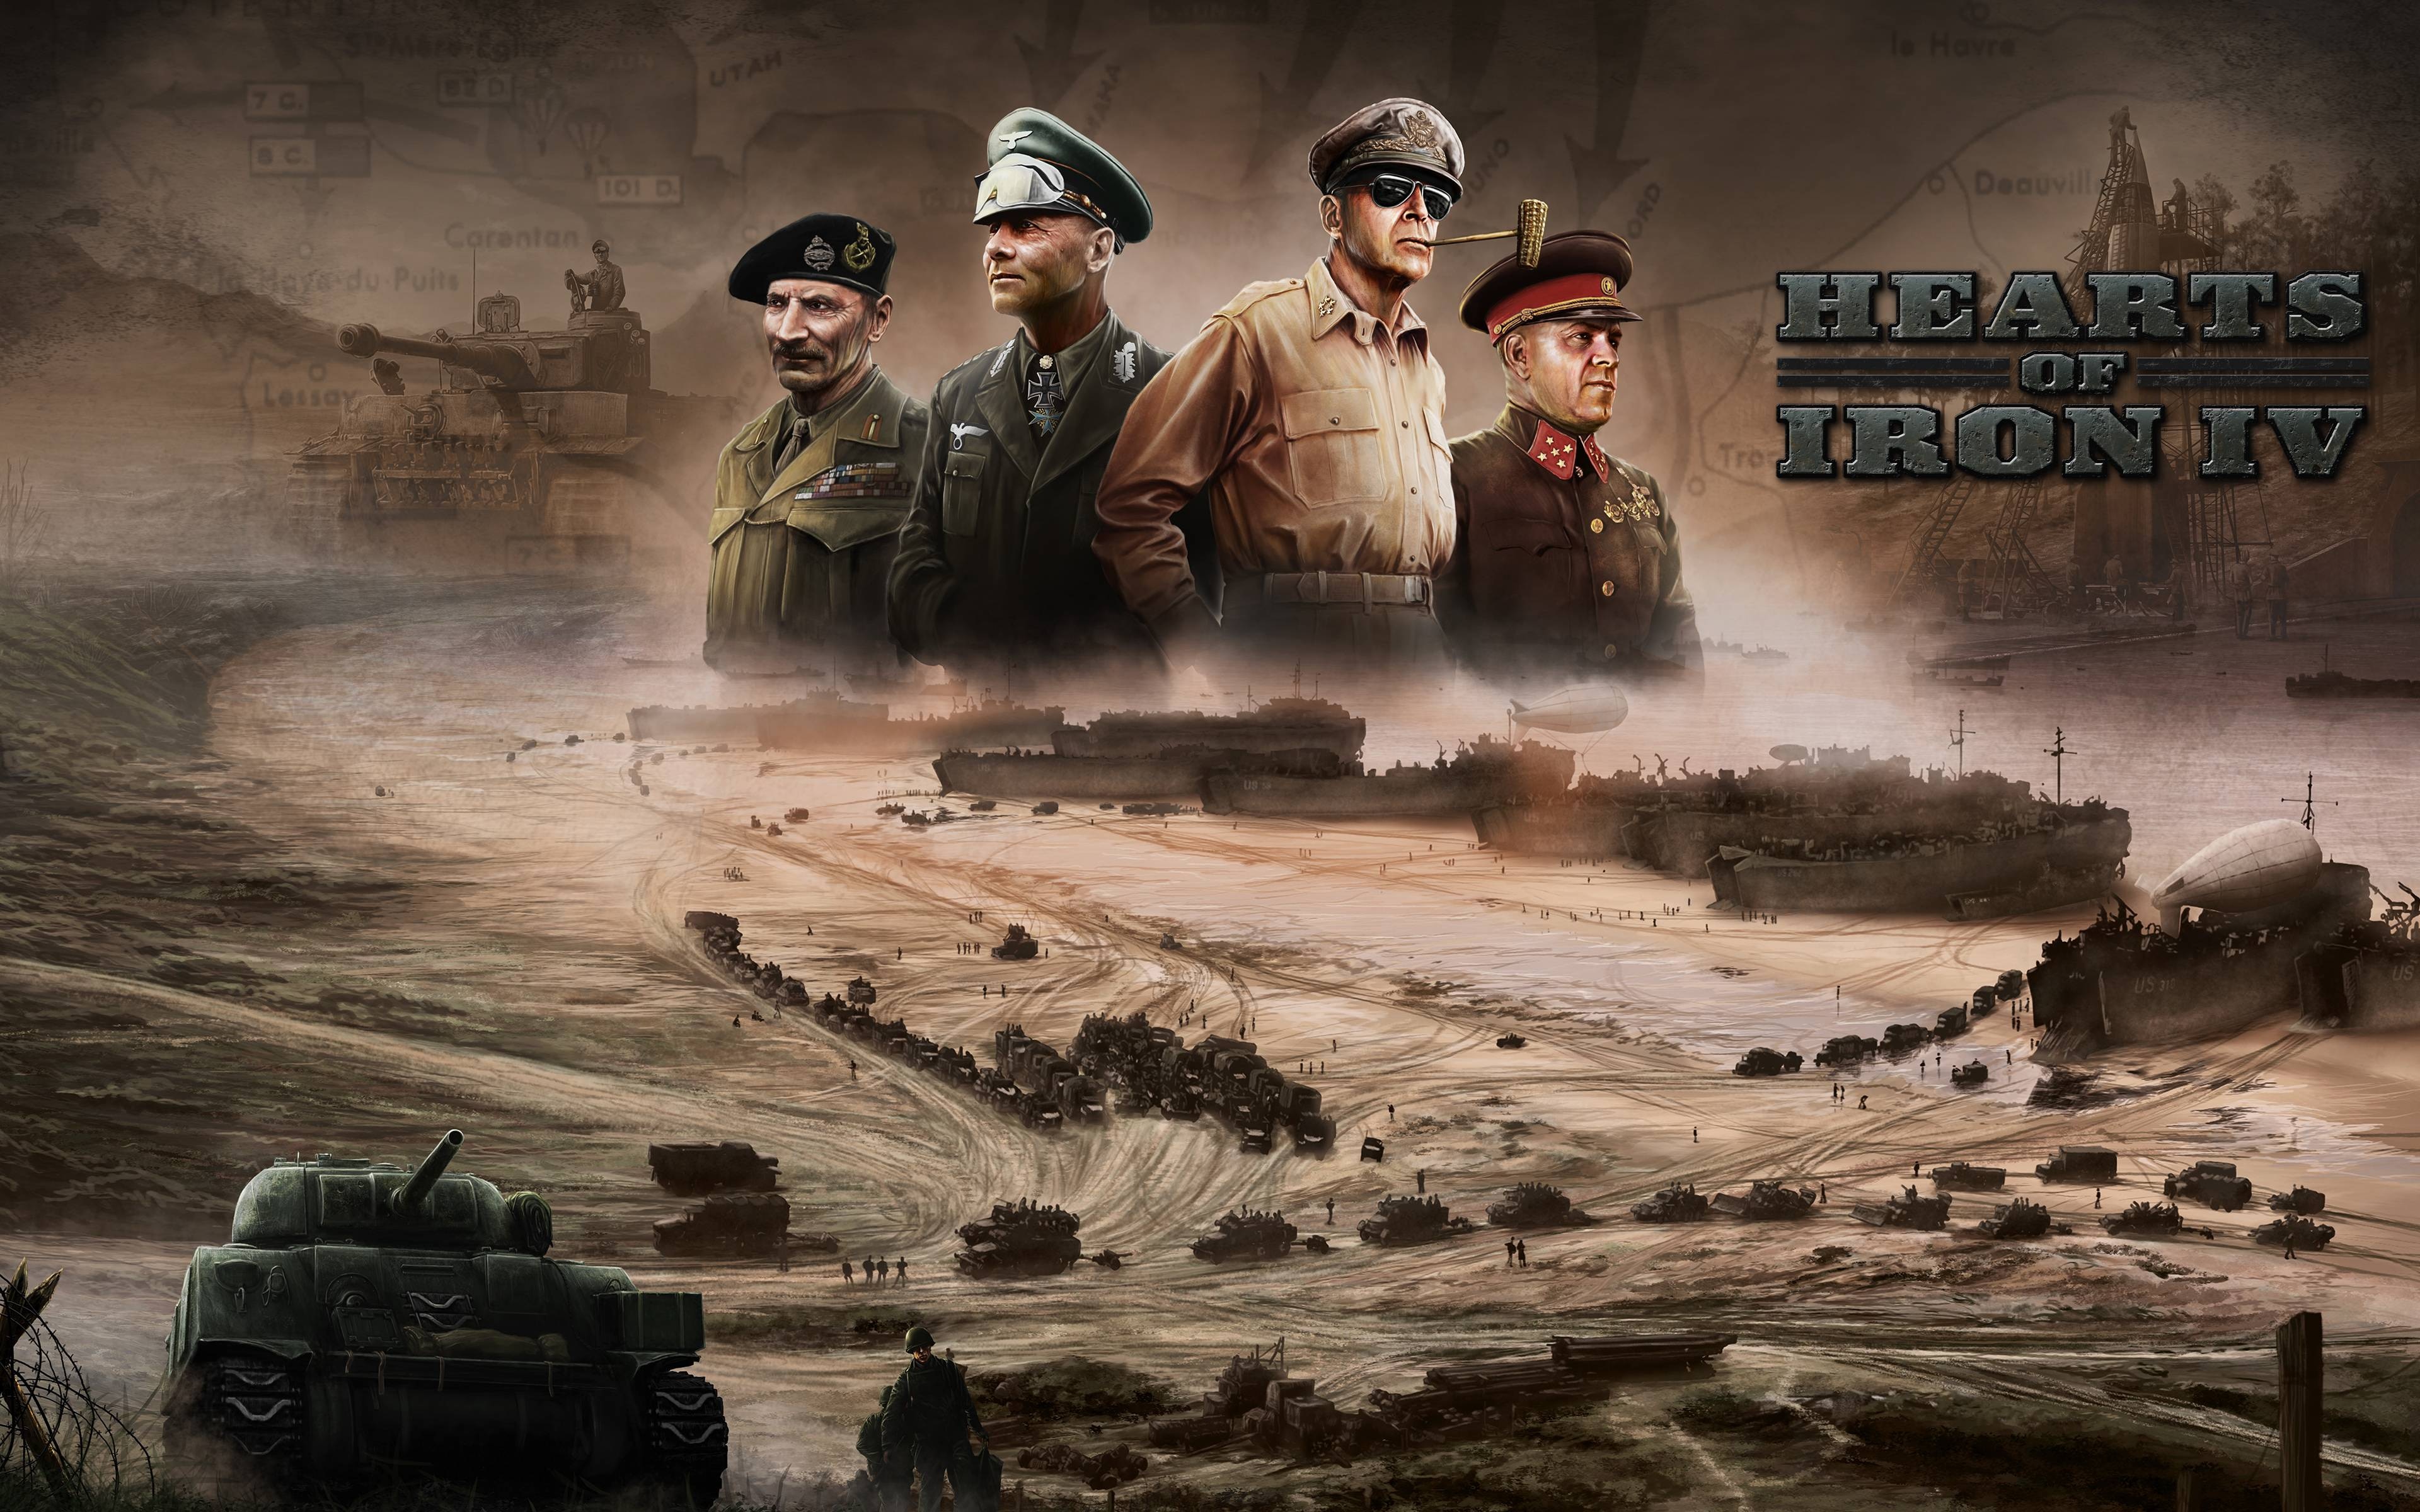 HoI4 Beta Screenshot accidentally posted in public forum : r/paradoxplaza